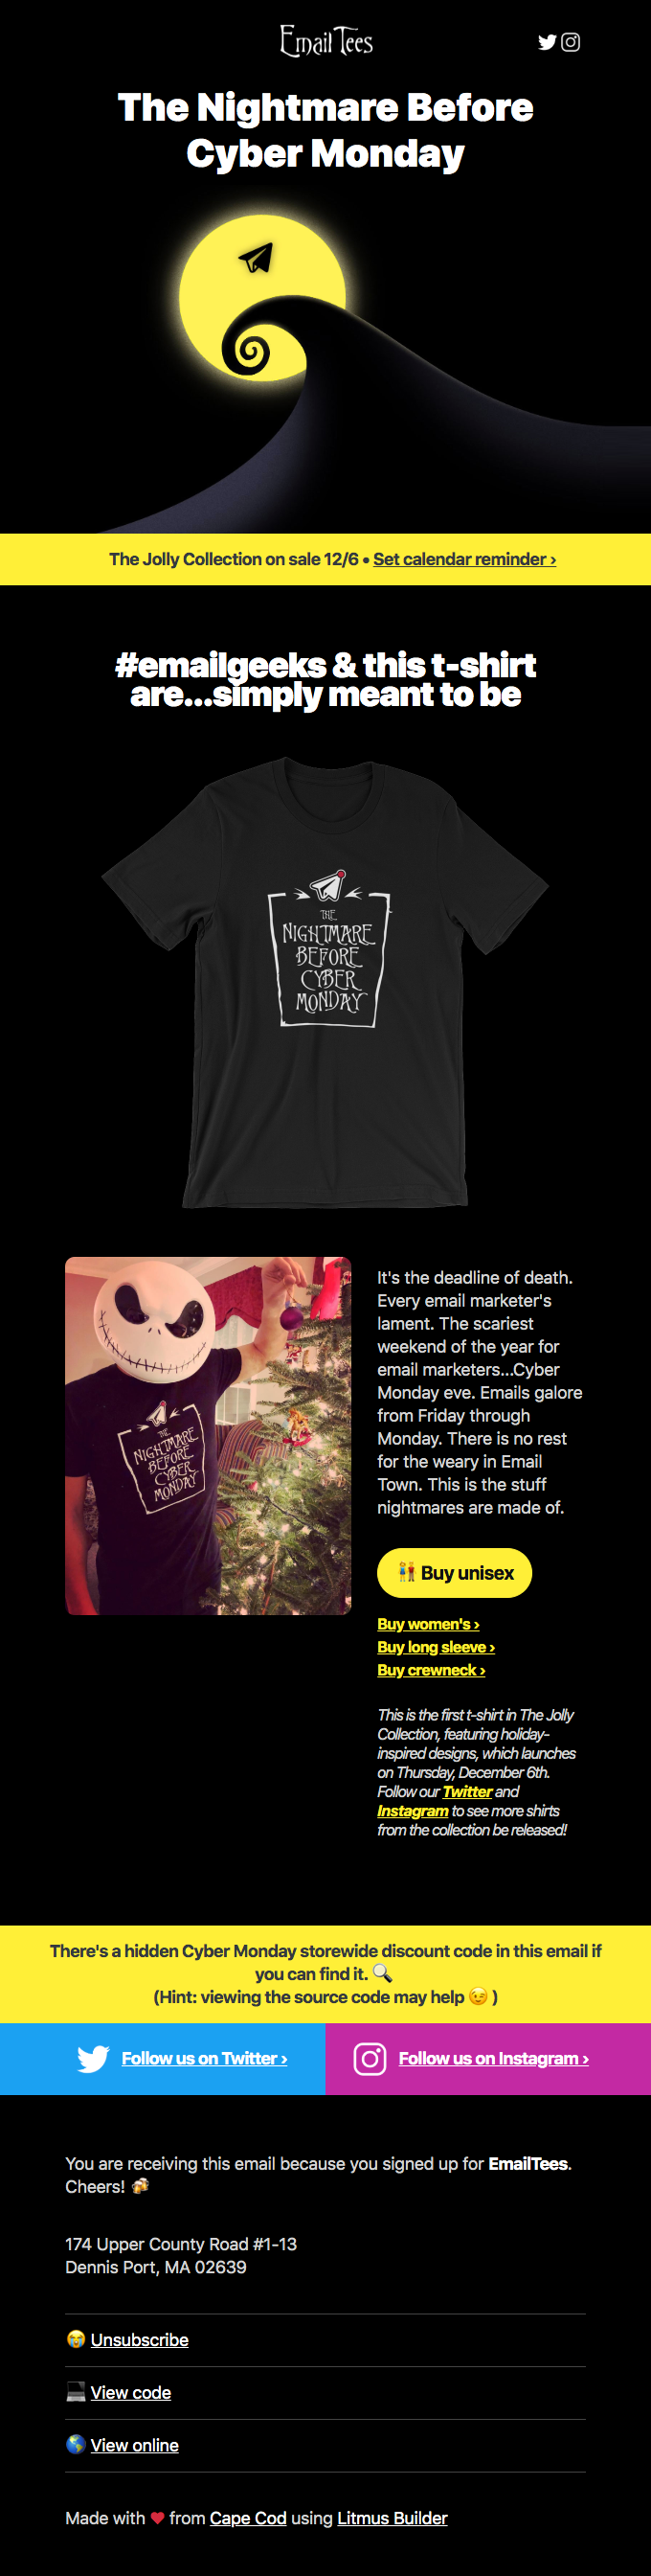 The Nightmare Before Cyber Monday